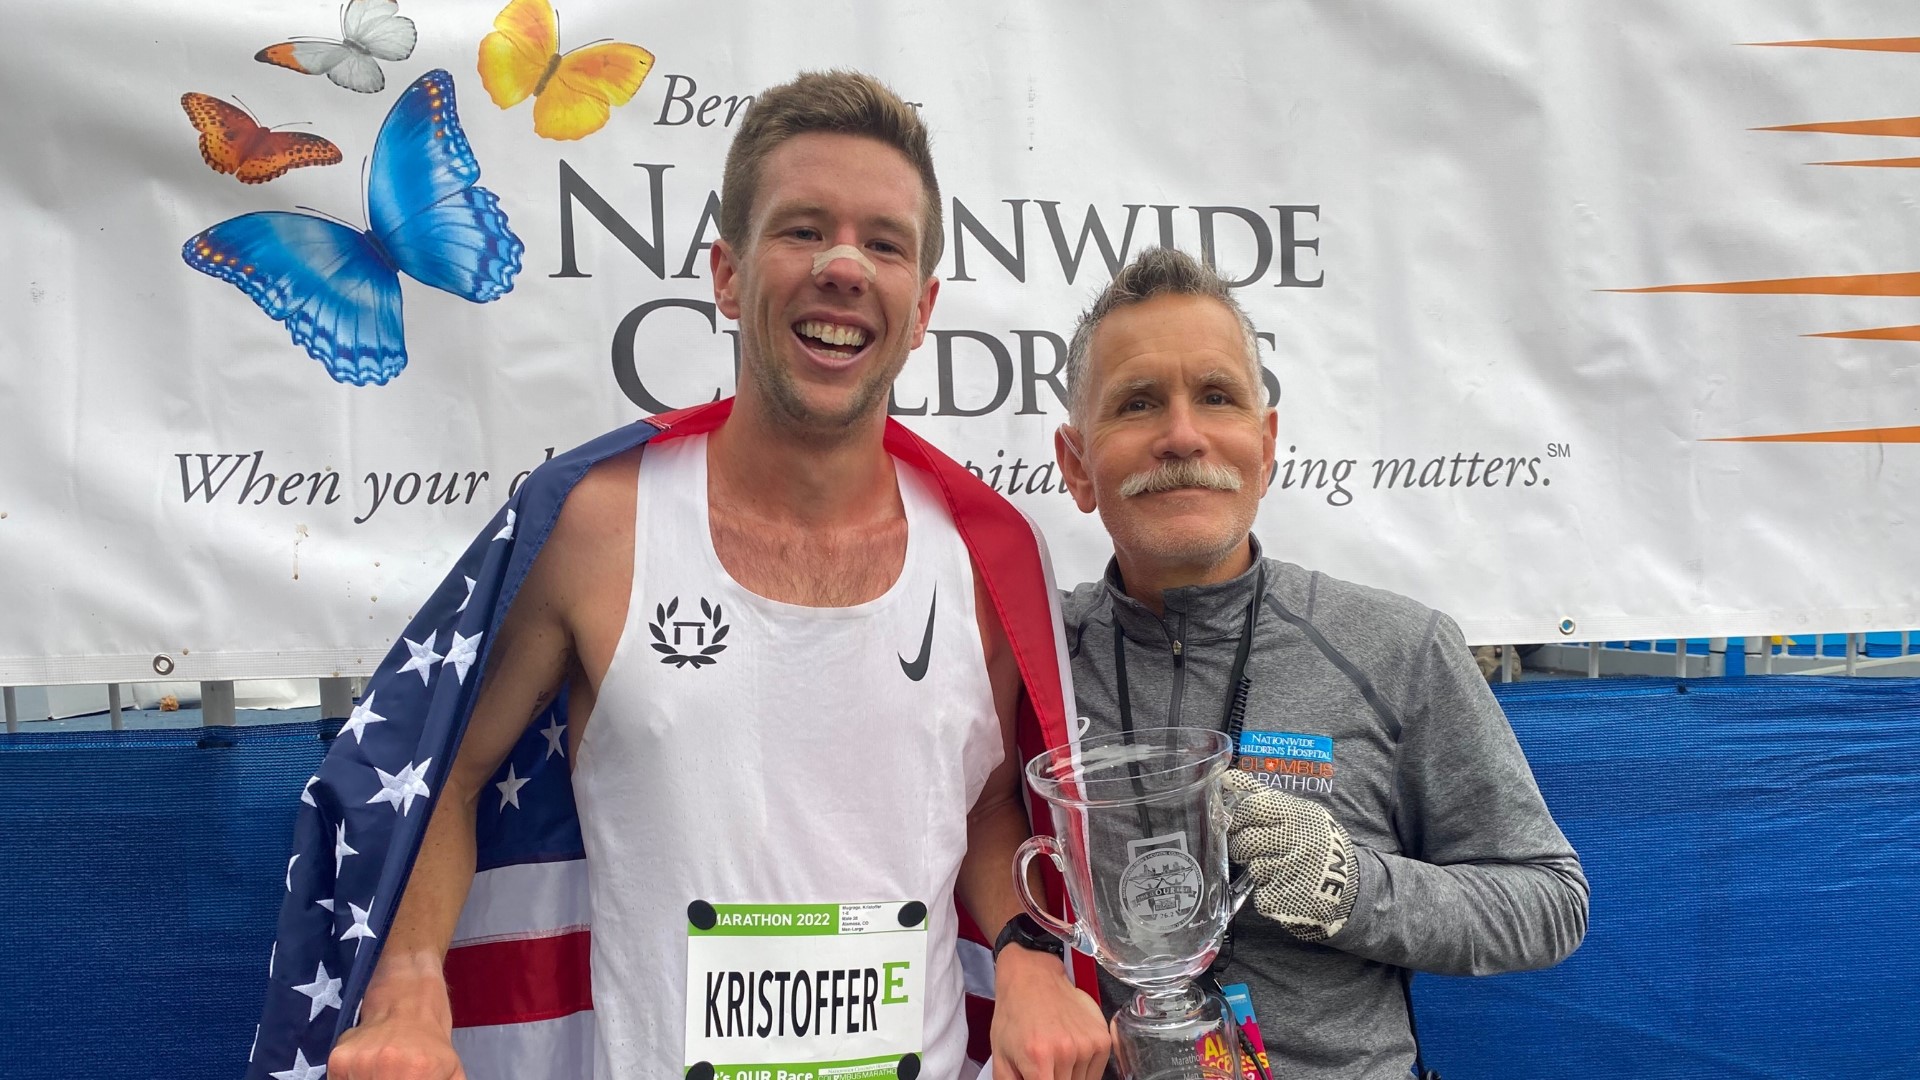 Kristoffer Mugrage, from Colorado, ended the marathon first with a time of 2:16:11. His time qualifies him for the U.S. Olympic Trials.